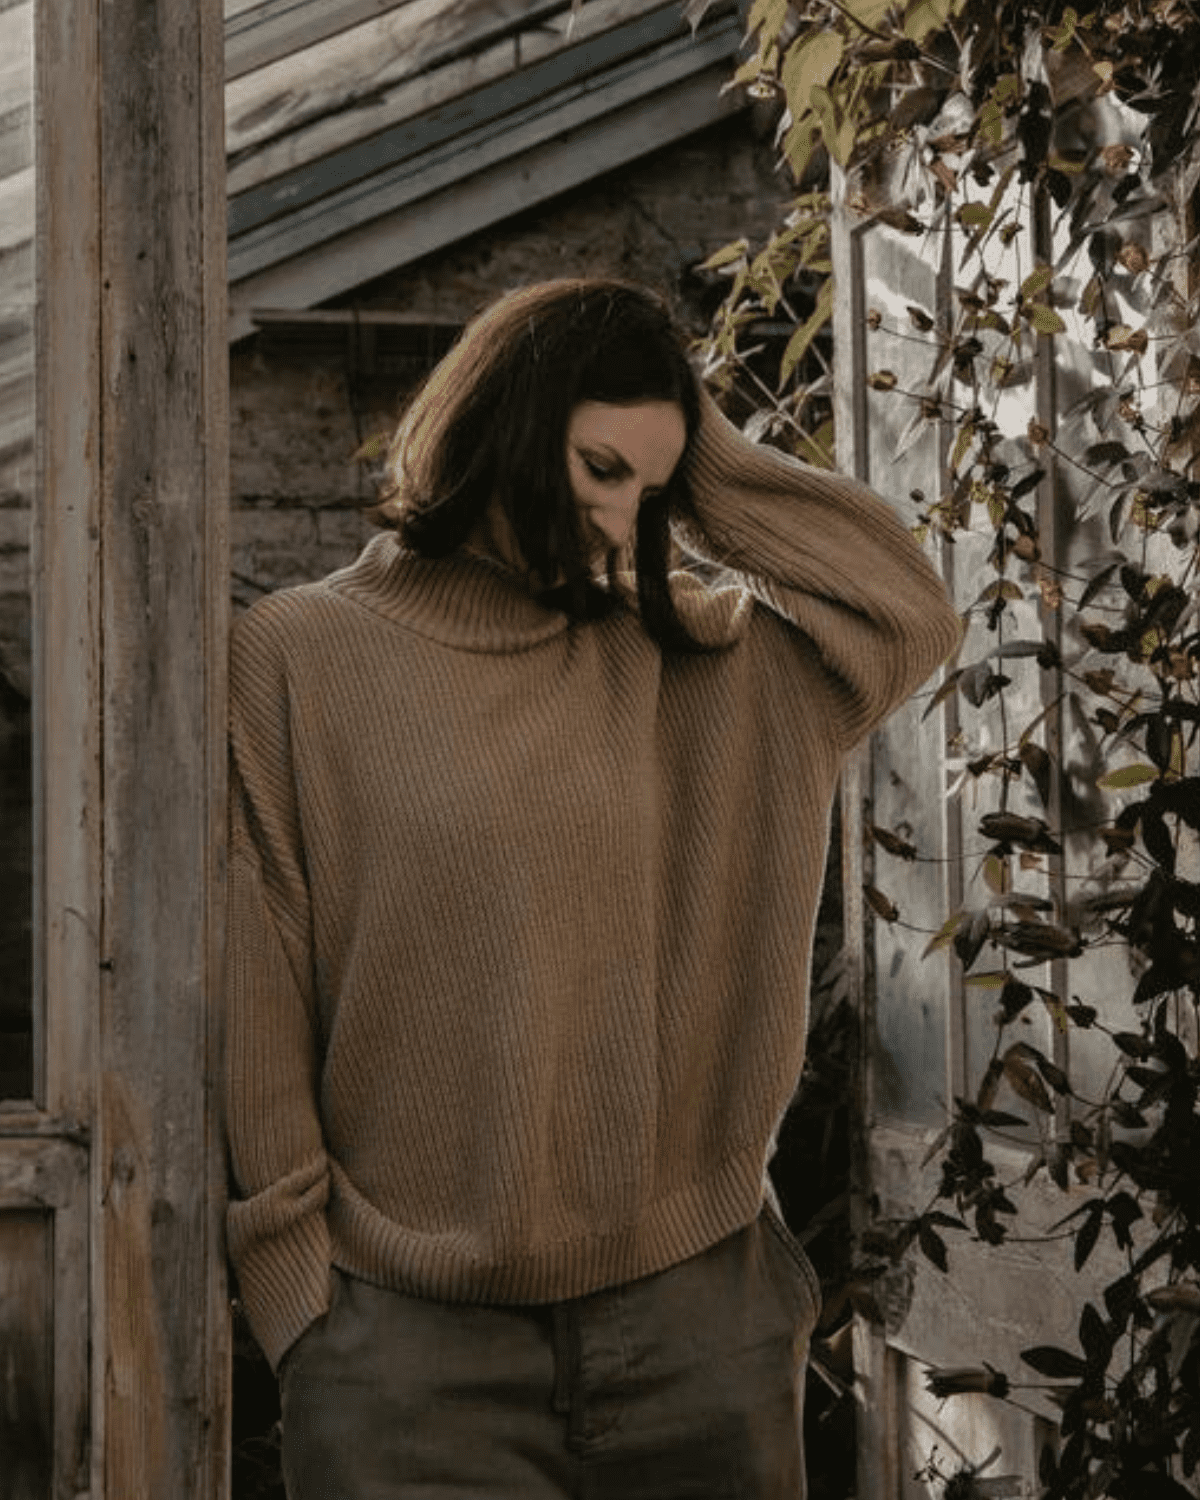 Knitted Turtleneck from The Simple Folk. Discover ethically-made